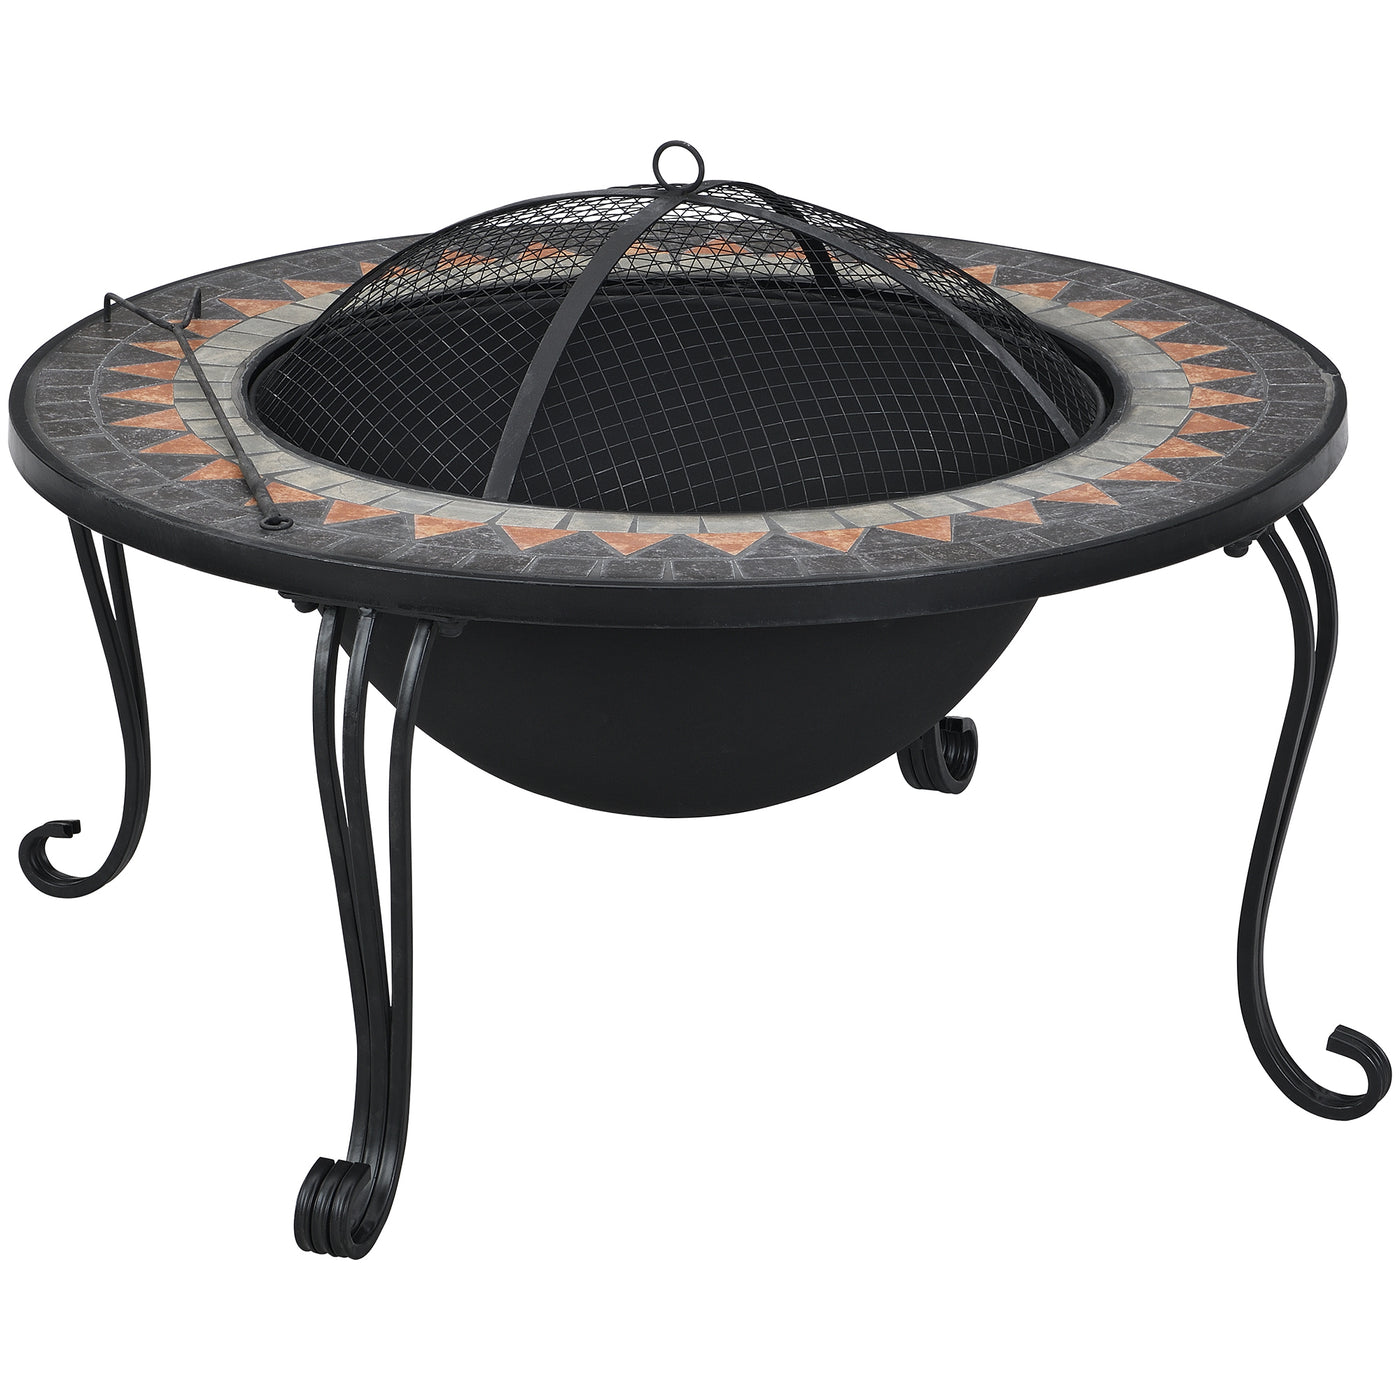 FirsTime & Co. Dark Gray Artemis Fire Pit With Screen Lid, Industrial Style, Made of Mosaic Tiles